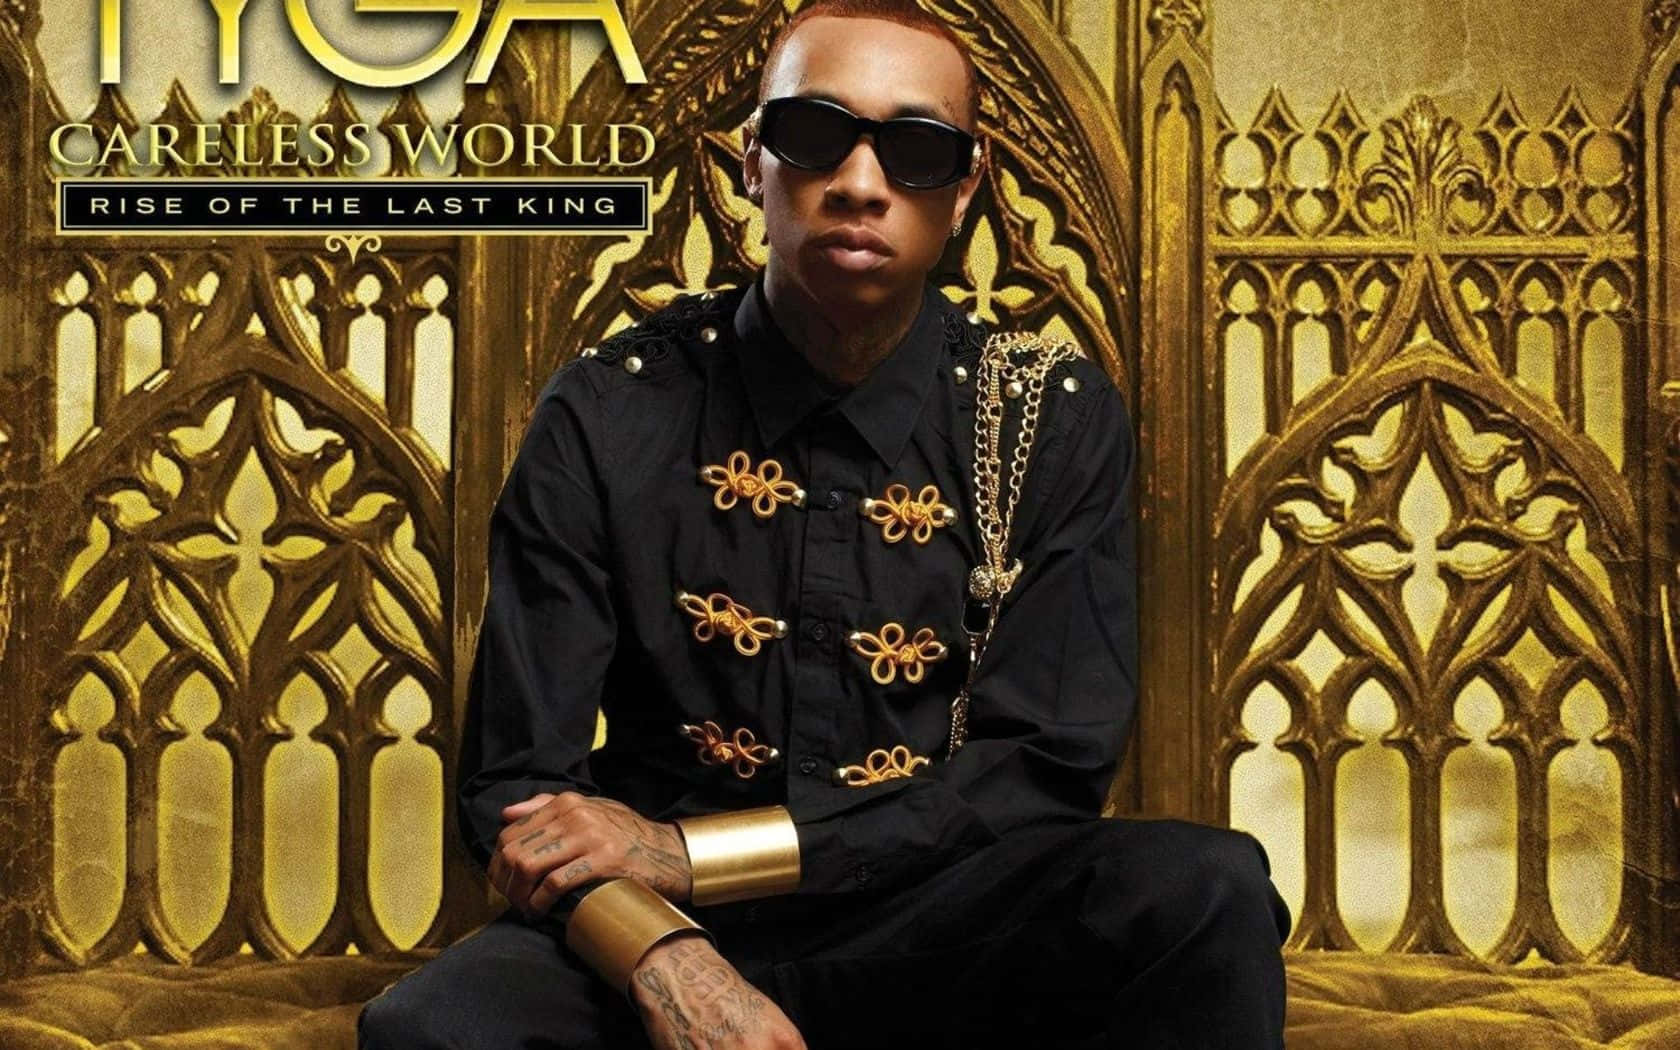 Rappertyga Is An American Rapper, Singer, And Songwriter. He Gained Popularity With His Debut Single 